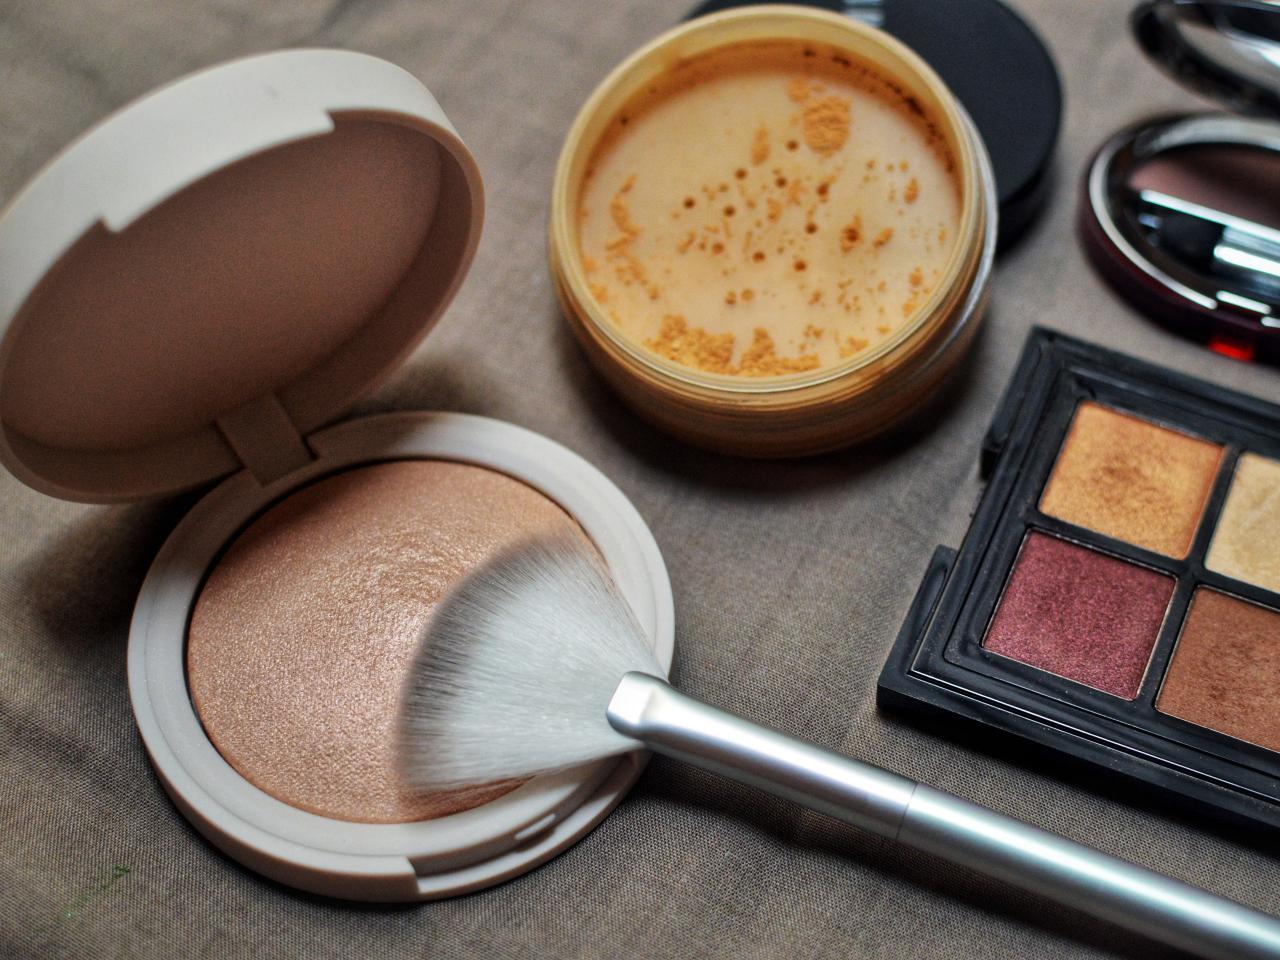 Recensione Bronzer Essence The Glowing Golds Vitamin E Baked Luminous  Bronzer